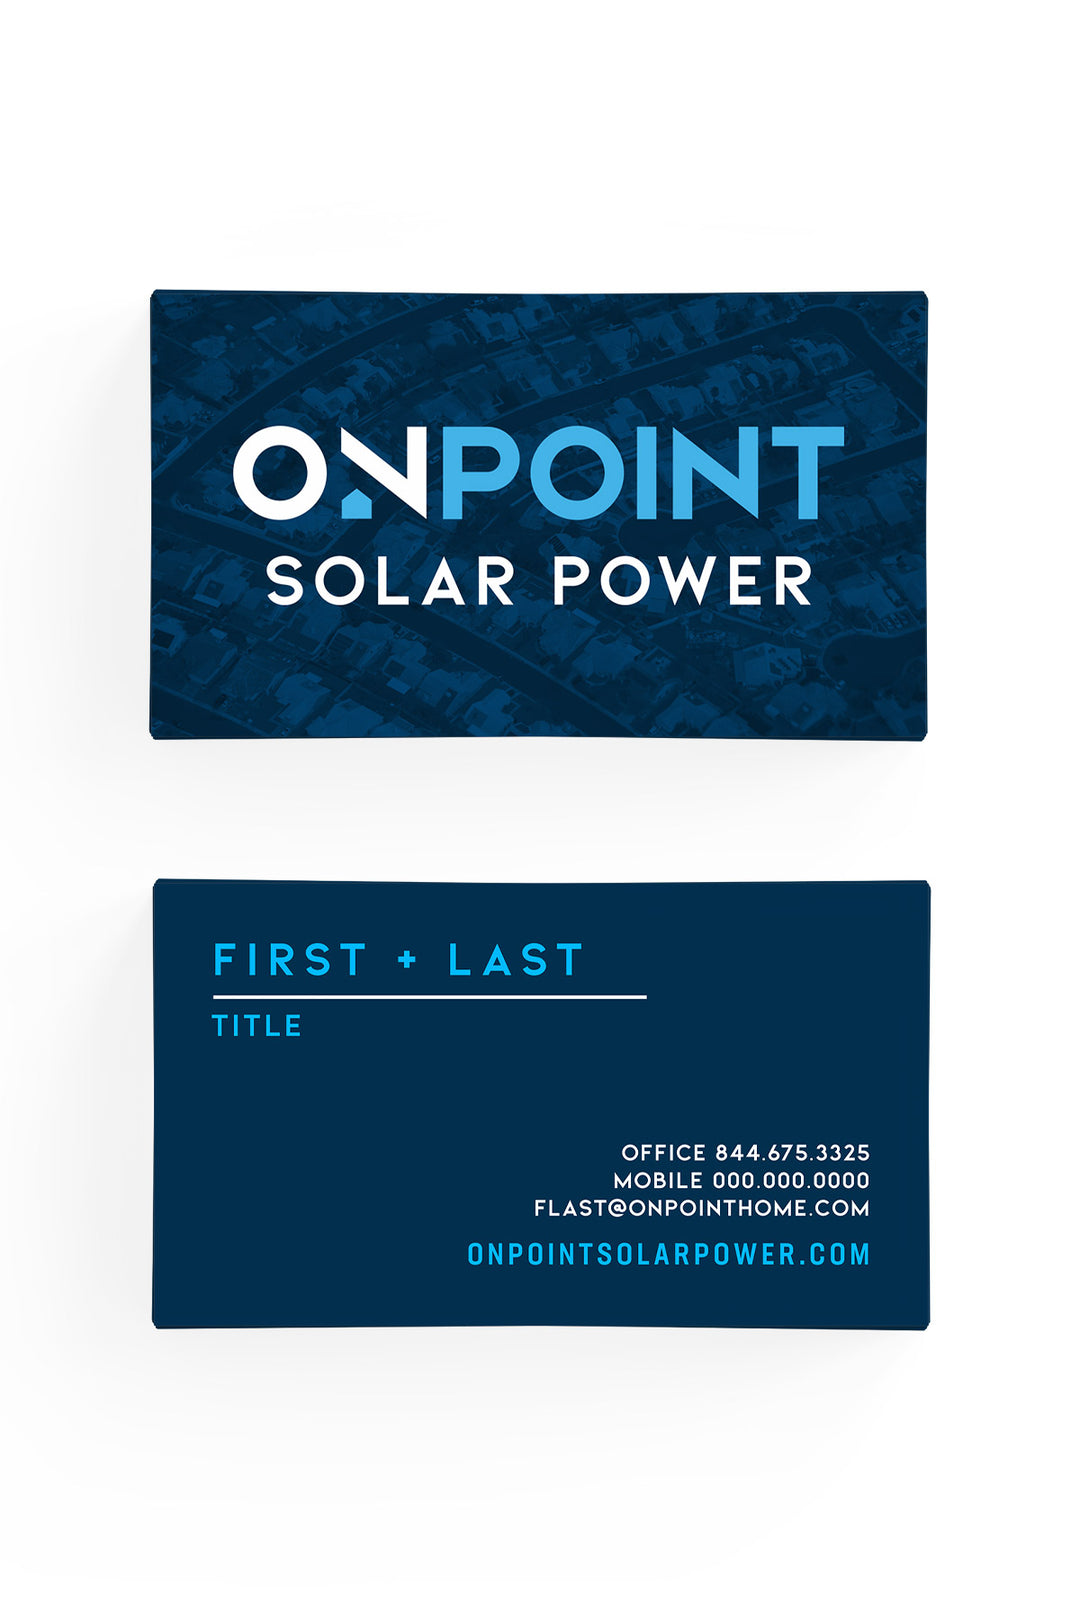 On Point Solar Power Business Cards